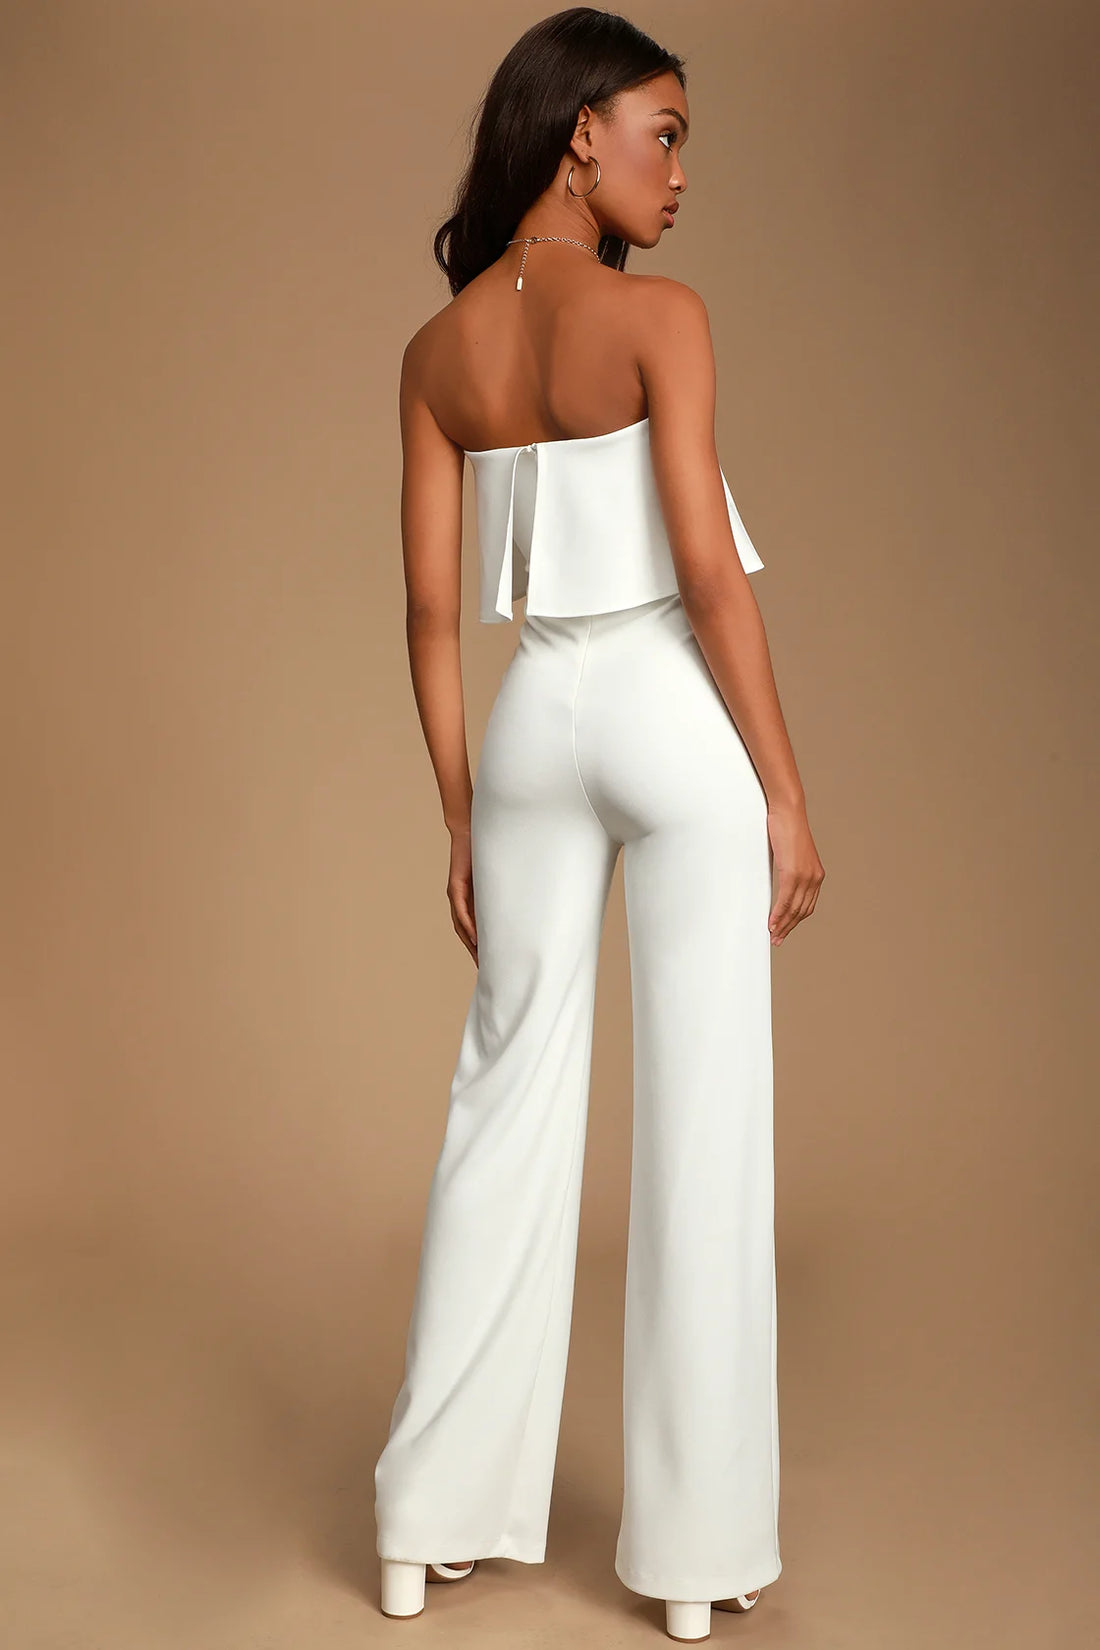 Lulus Power of Love White Strapless Jumpsuit- XS